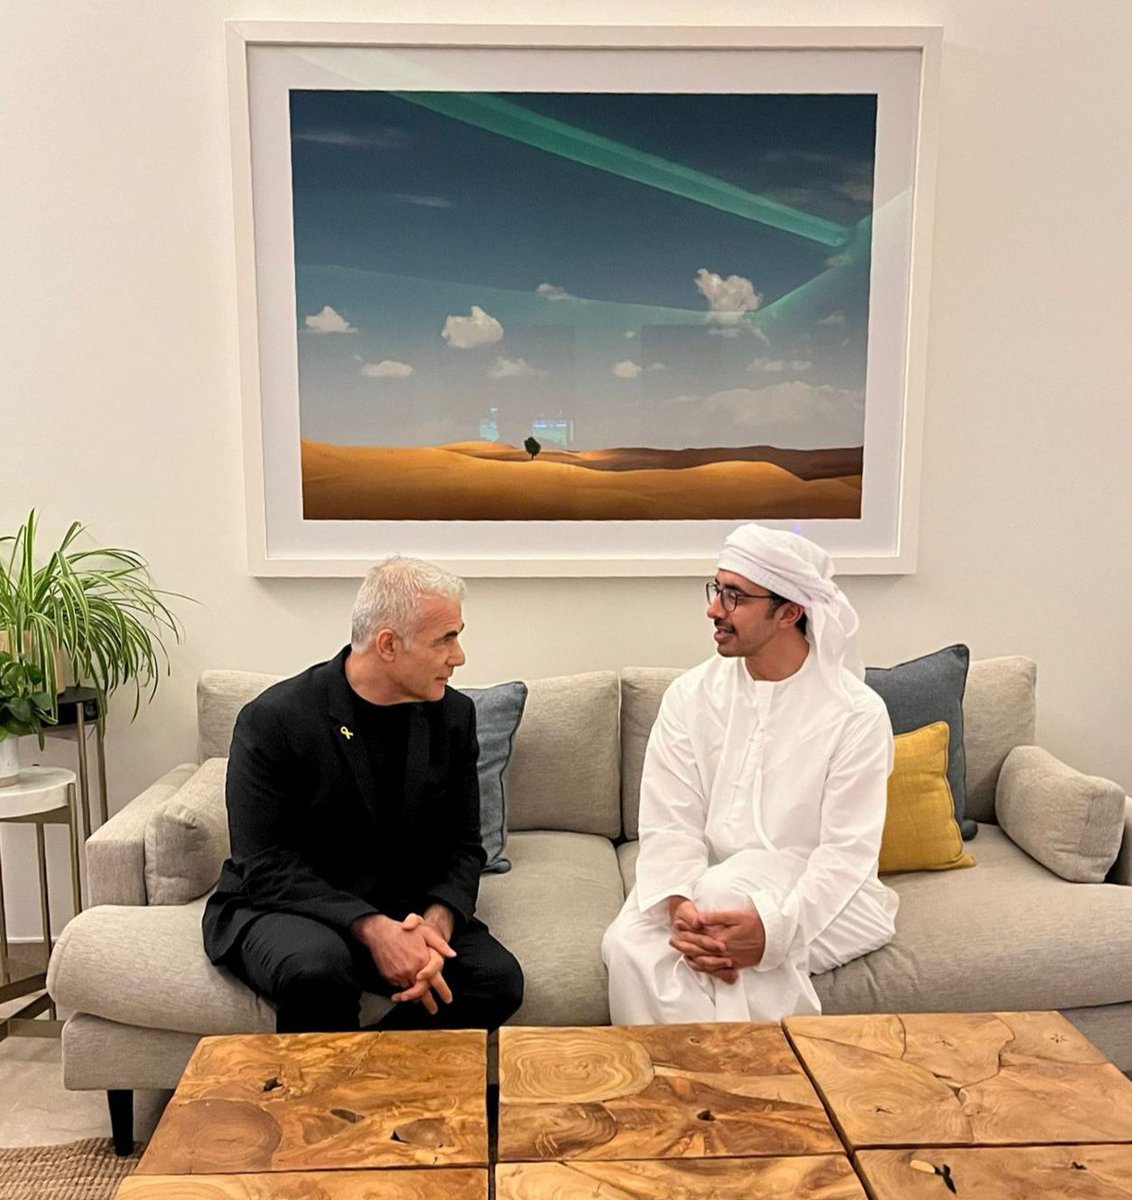 Israel's oppositon leader Lapid met with the Emirati FM in UAE, and spoke with him on the hostages deal. Israel PM Netanyahu has not visited the UAE since returning to office last year